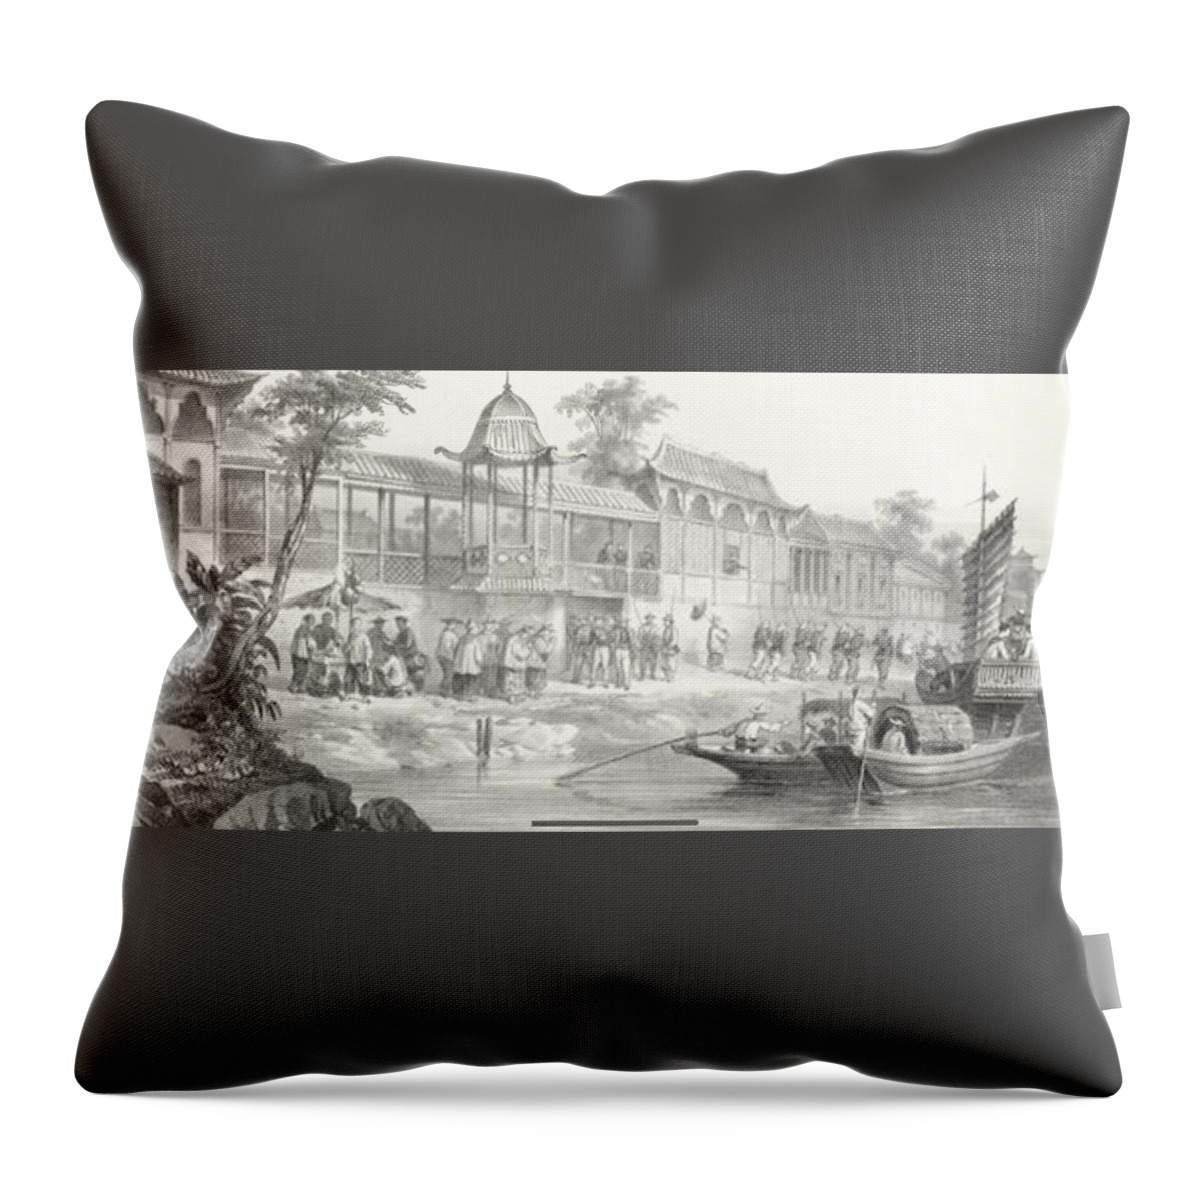 Fortavion (gc) China War. Historical And Anecdotal Shown Great Panorama Throw Pillow featuring the painting Historical And Anecdotal Shown Great Panorama by MotionAge Designs